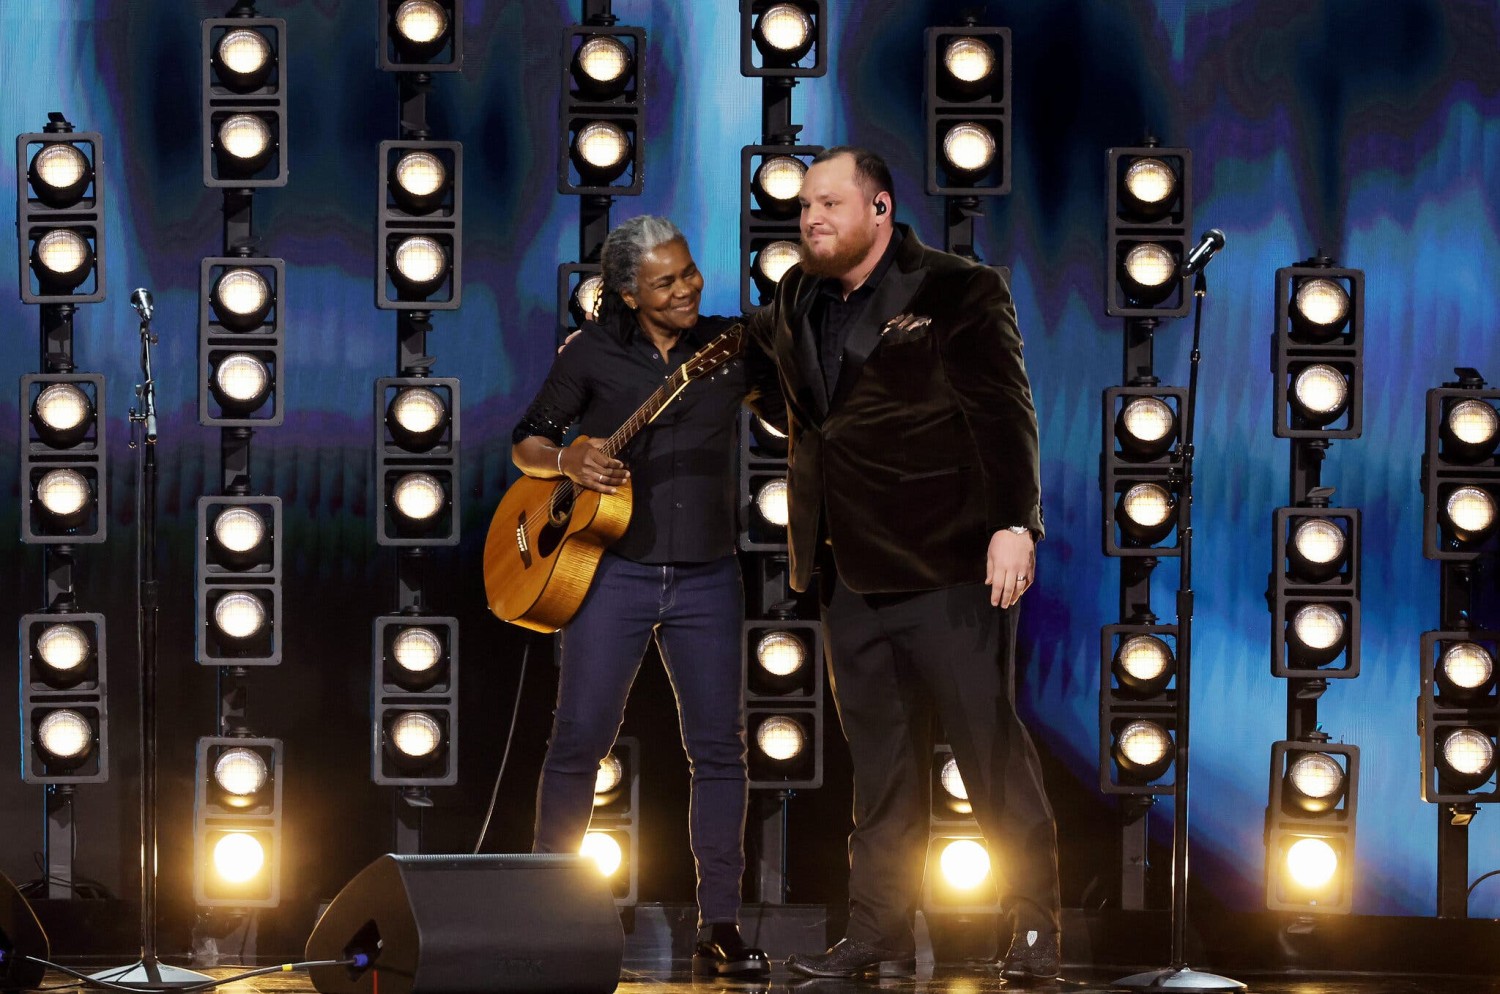 Tracy Chapman joined Luke Combs, the country singer whose “Fast Car” cover became a hit, onstage at the Grammys on Sunday night.Credit...Kevin Winter/Getty Images